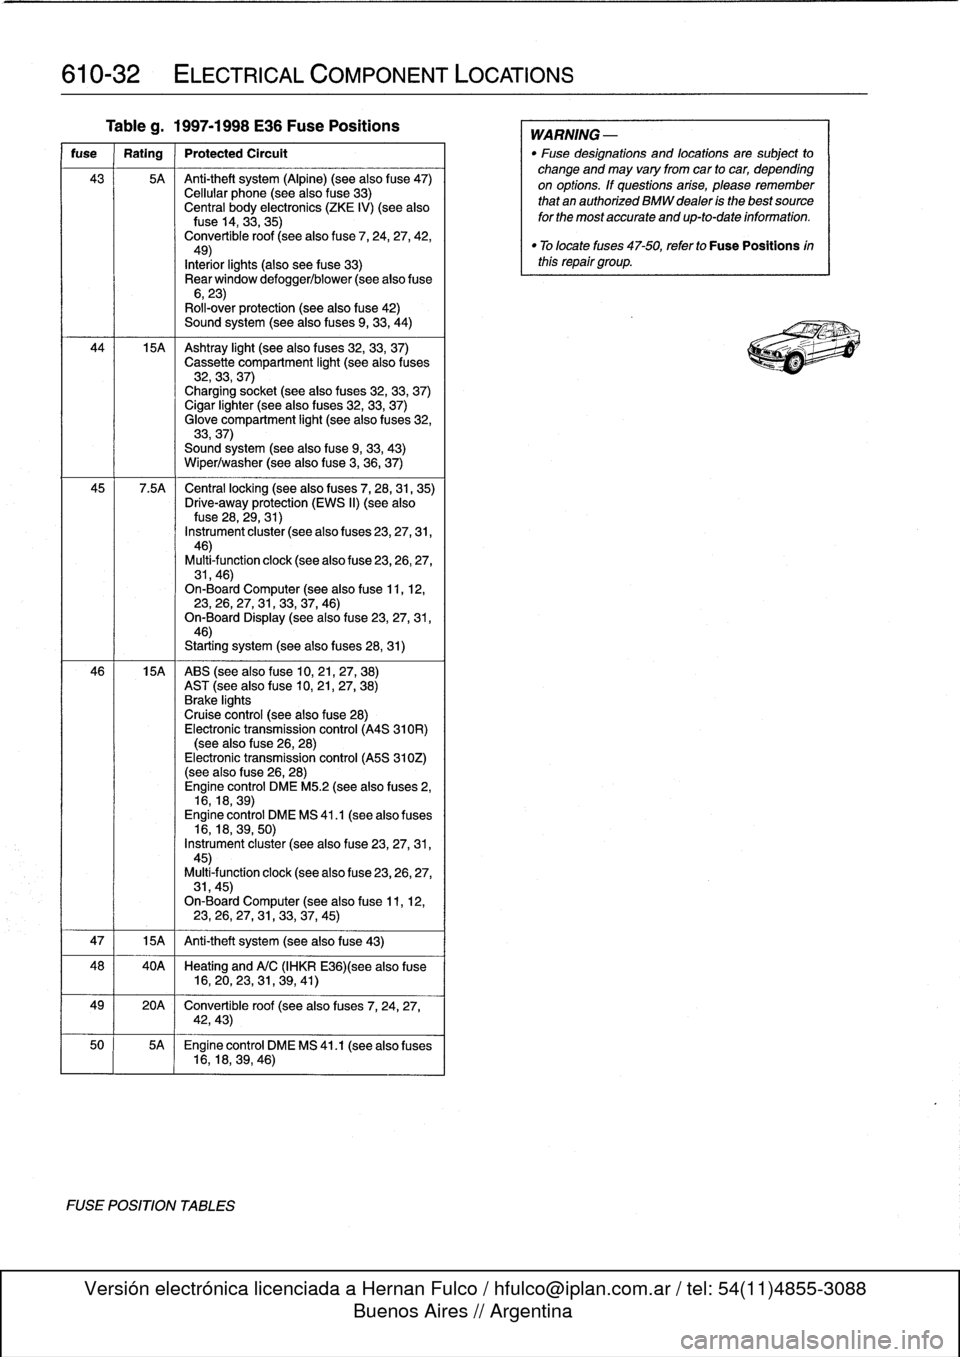 BMW 318i 1997 E36 Service Manual 
610-32

	

ELECTRICAL
COMPONENT
LOCATIONS

Tableg
.
1997-1998
E36
Fuse
Positions

fuse

	

Rating

	

Protected
Circult

43

	

5A

	

Anti-theft
system
(Alpine)
(see
also
f
use47)
Cellular
phone
(se